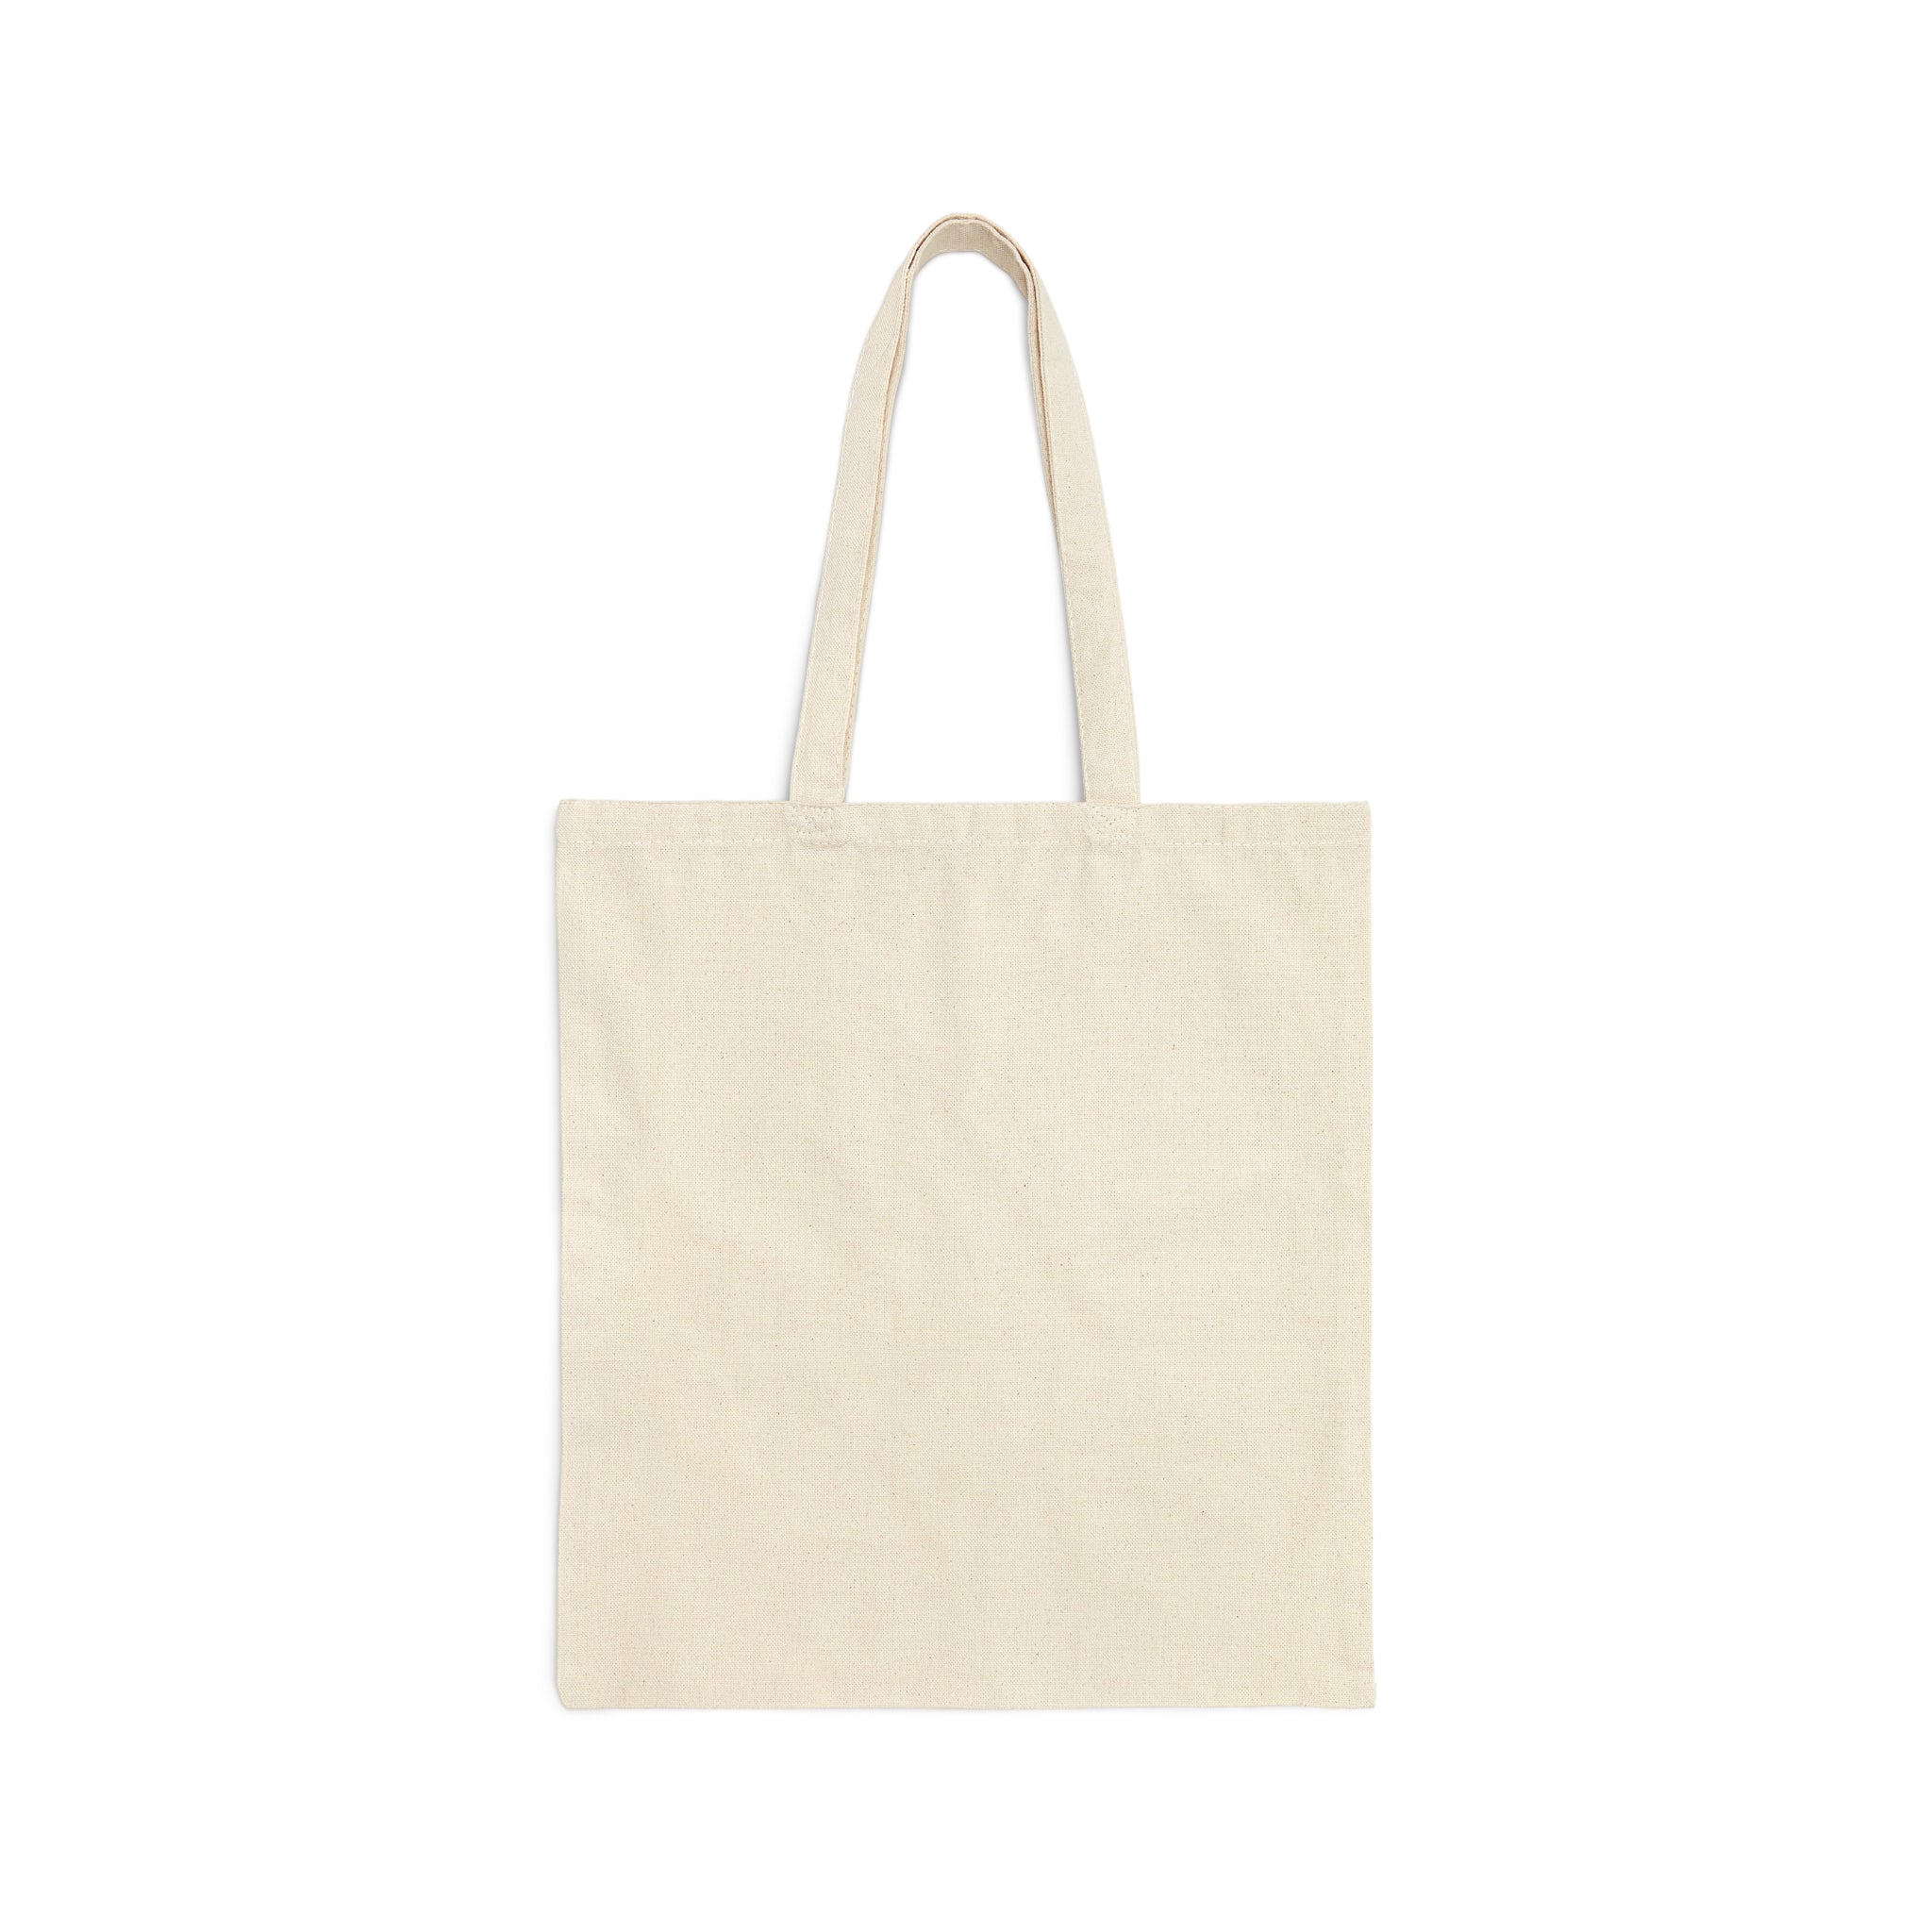 Through It All Tote